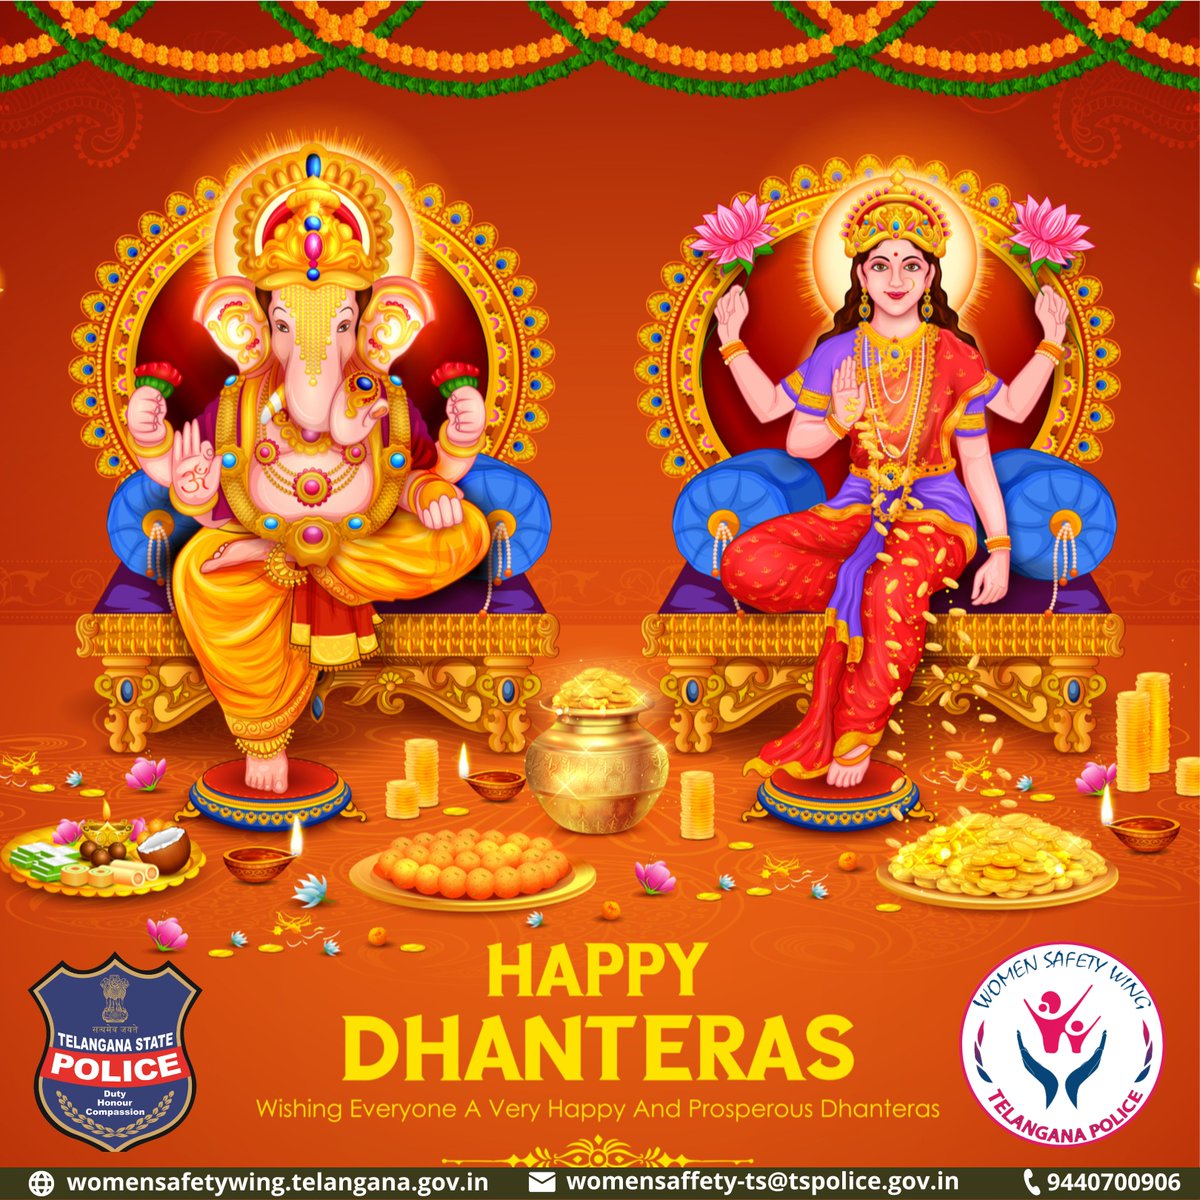 May Goddess Lakshmi always stay in your heart and help you to lead a happy and peaceful life. Happy Dhanteras to you and your family. #Dhanteras #dhanteraswishes #dhanteras2022 #dhanterasspecial #WomenSafetyWing #TelanganaPolice #Telangana #India #Deepavali #Diwali